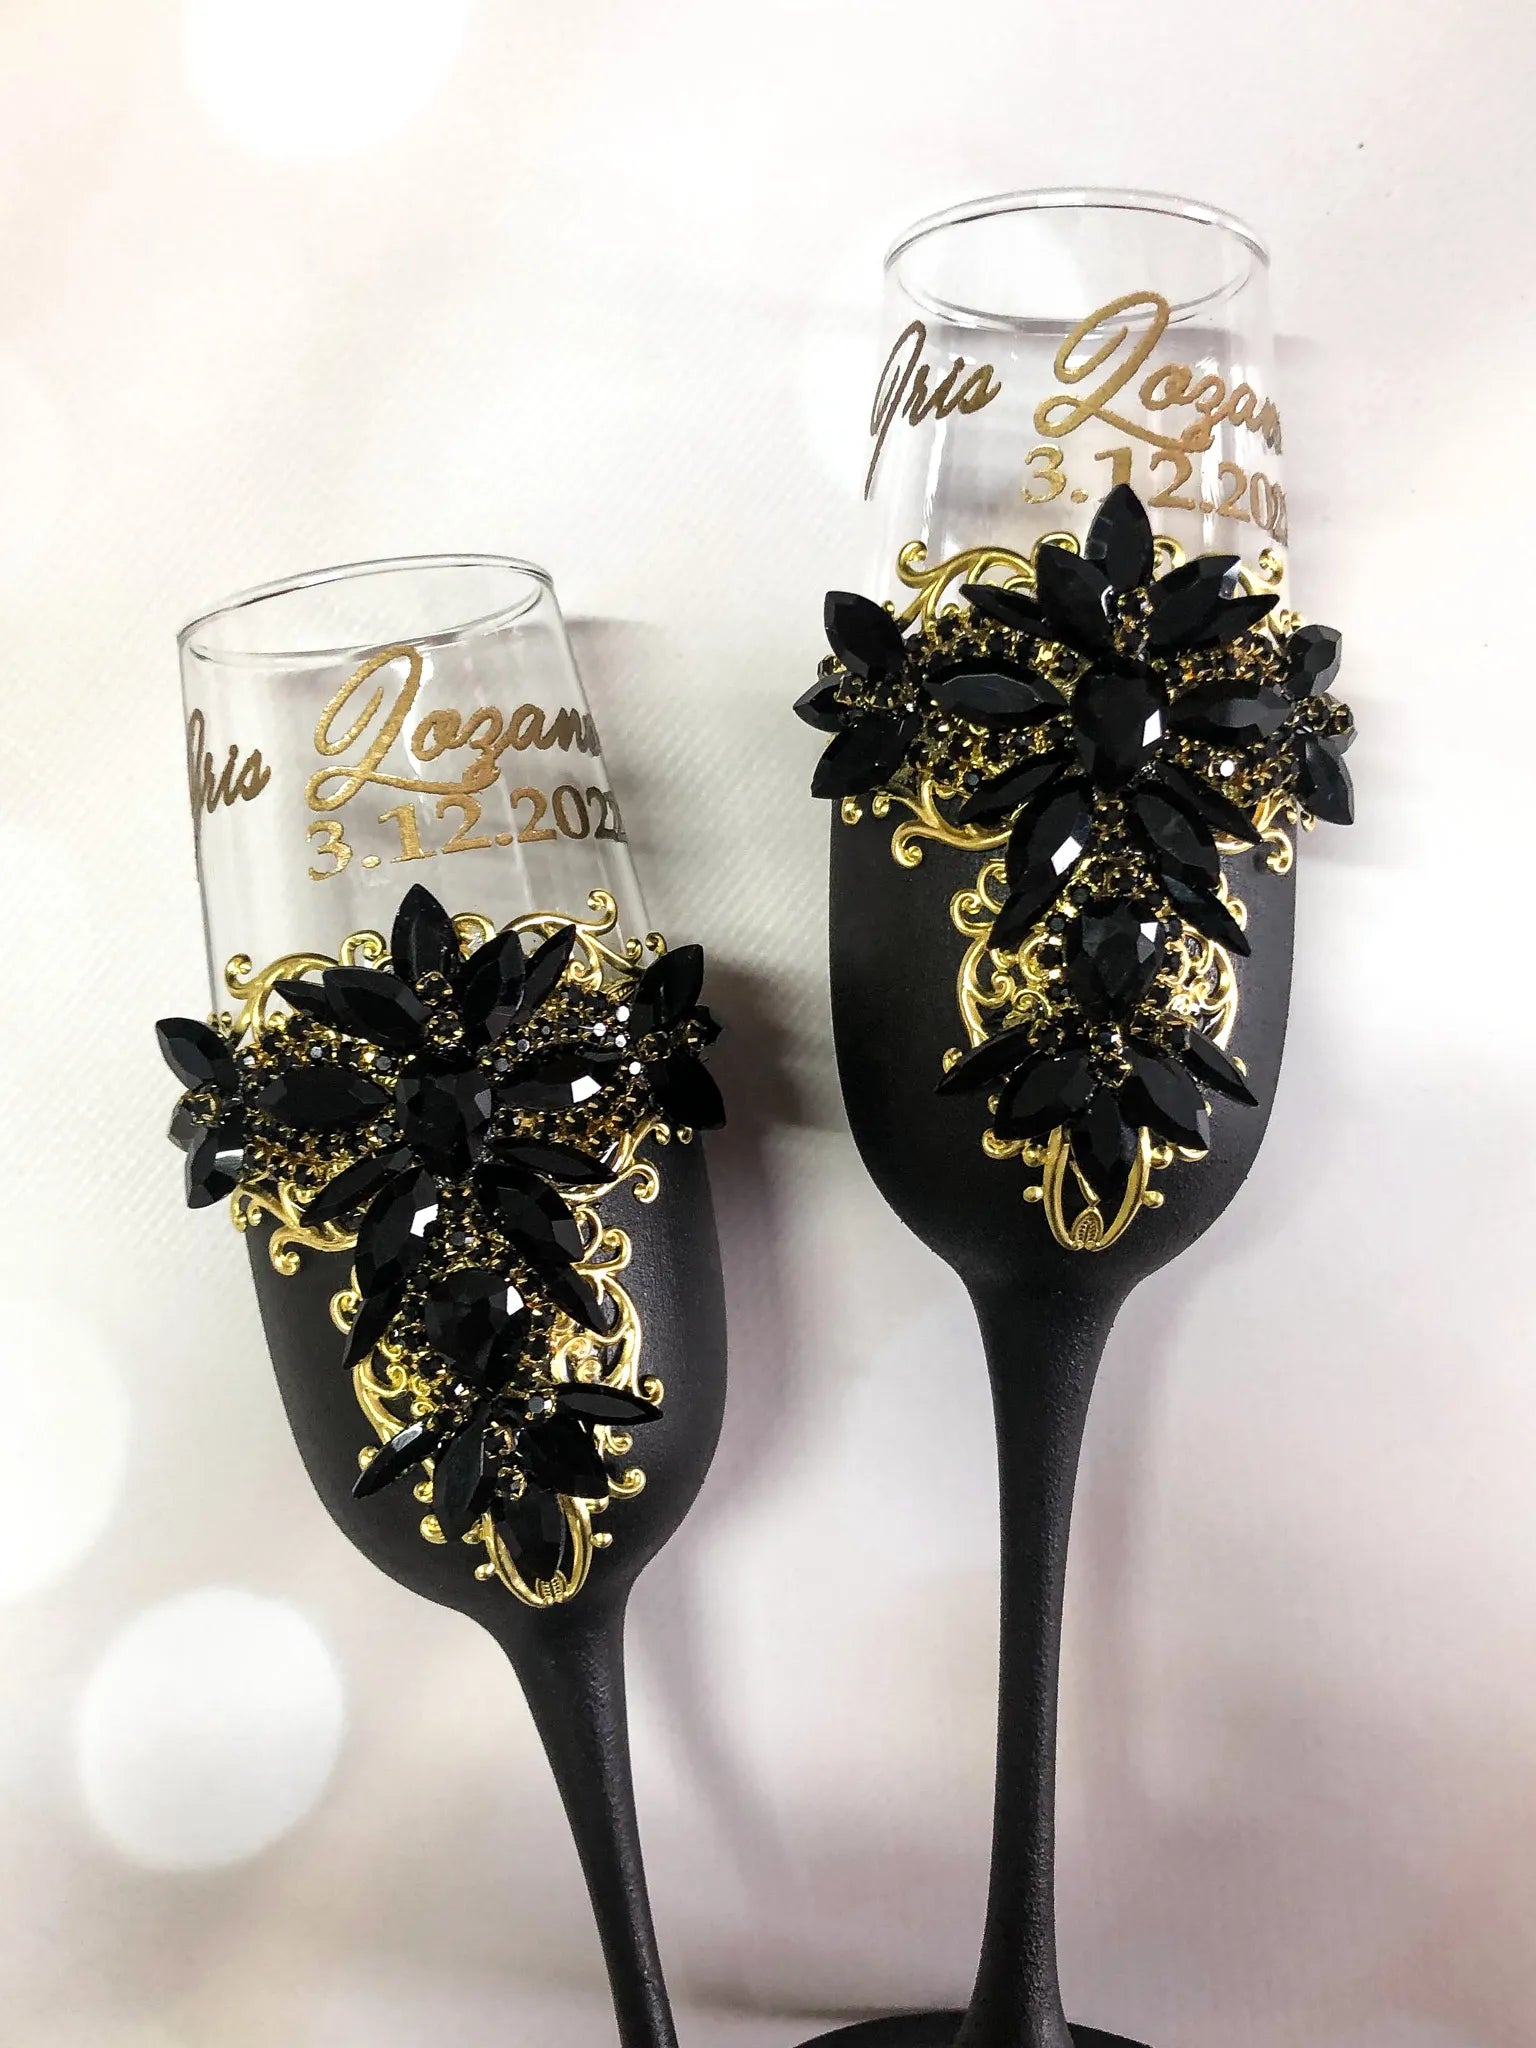 Unique wedding toasting glasses with black crystal detailing